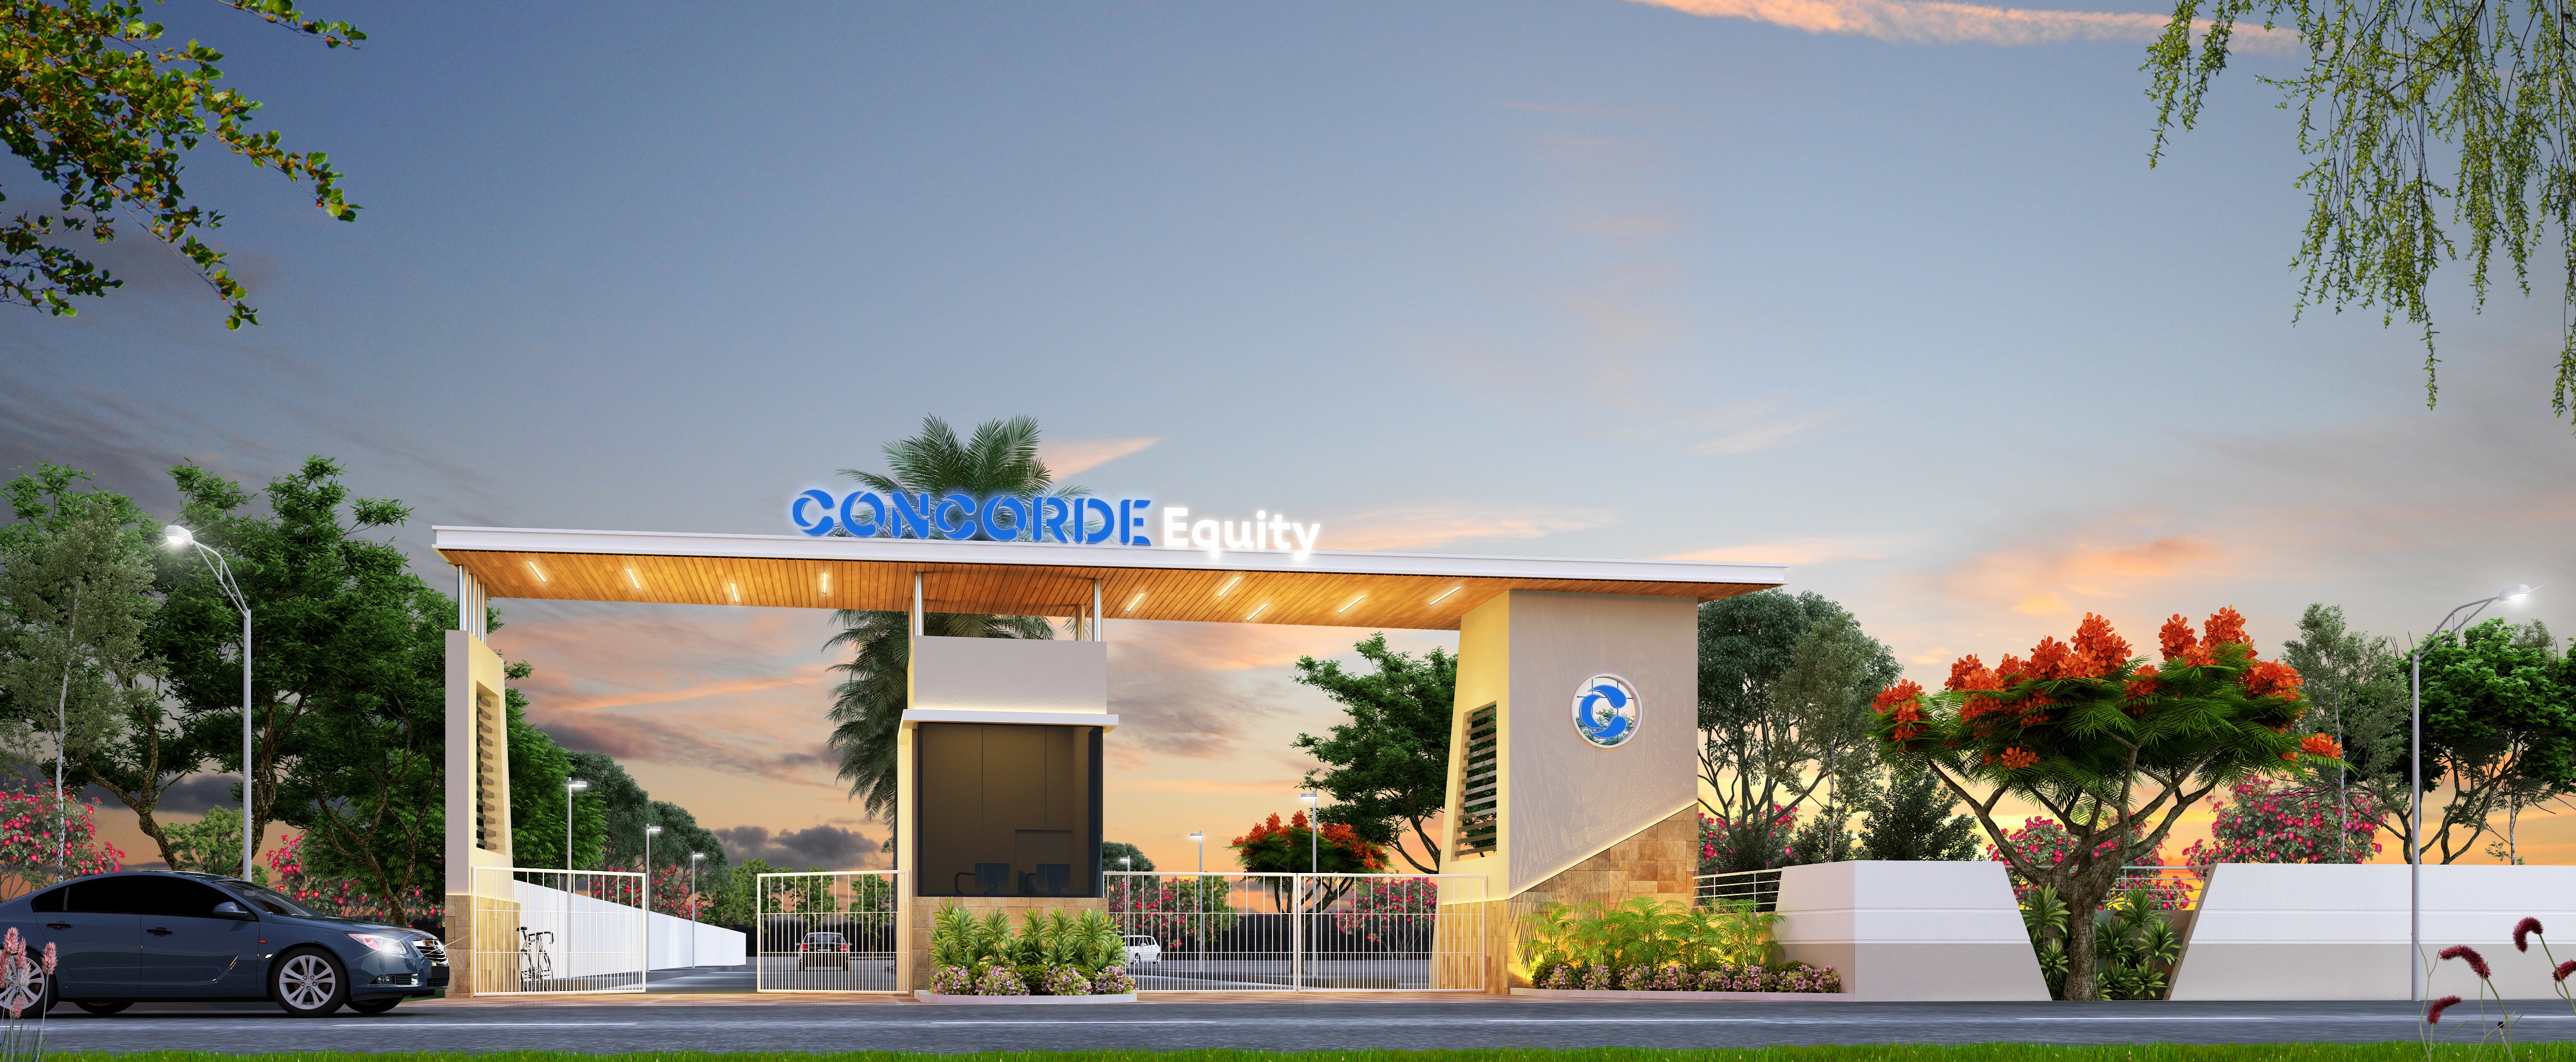 Concorde Launches 23 Acre Plotted Development ‘Concorde Equity’